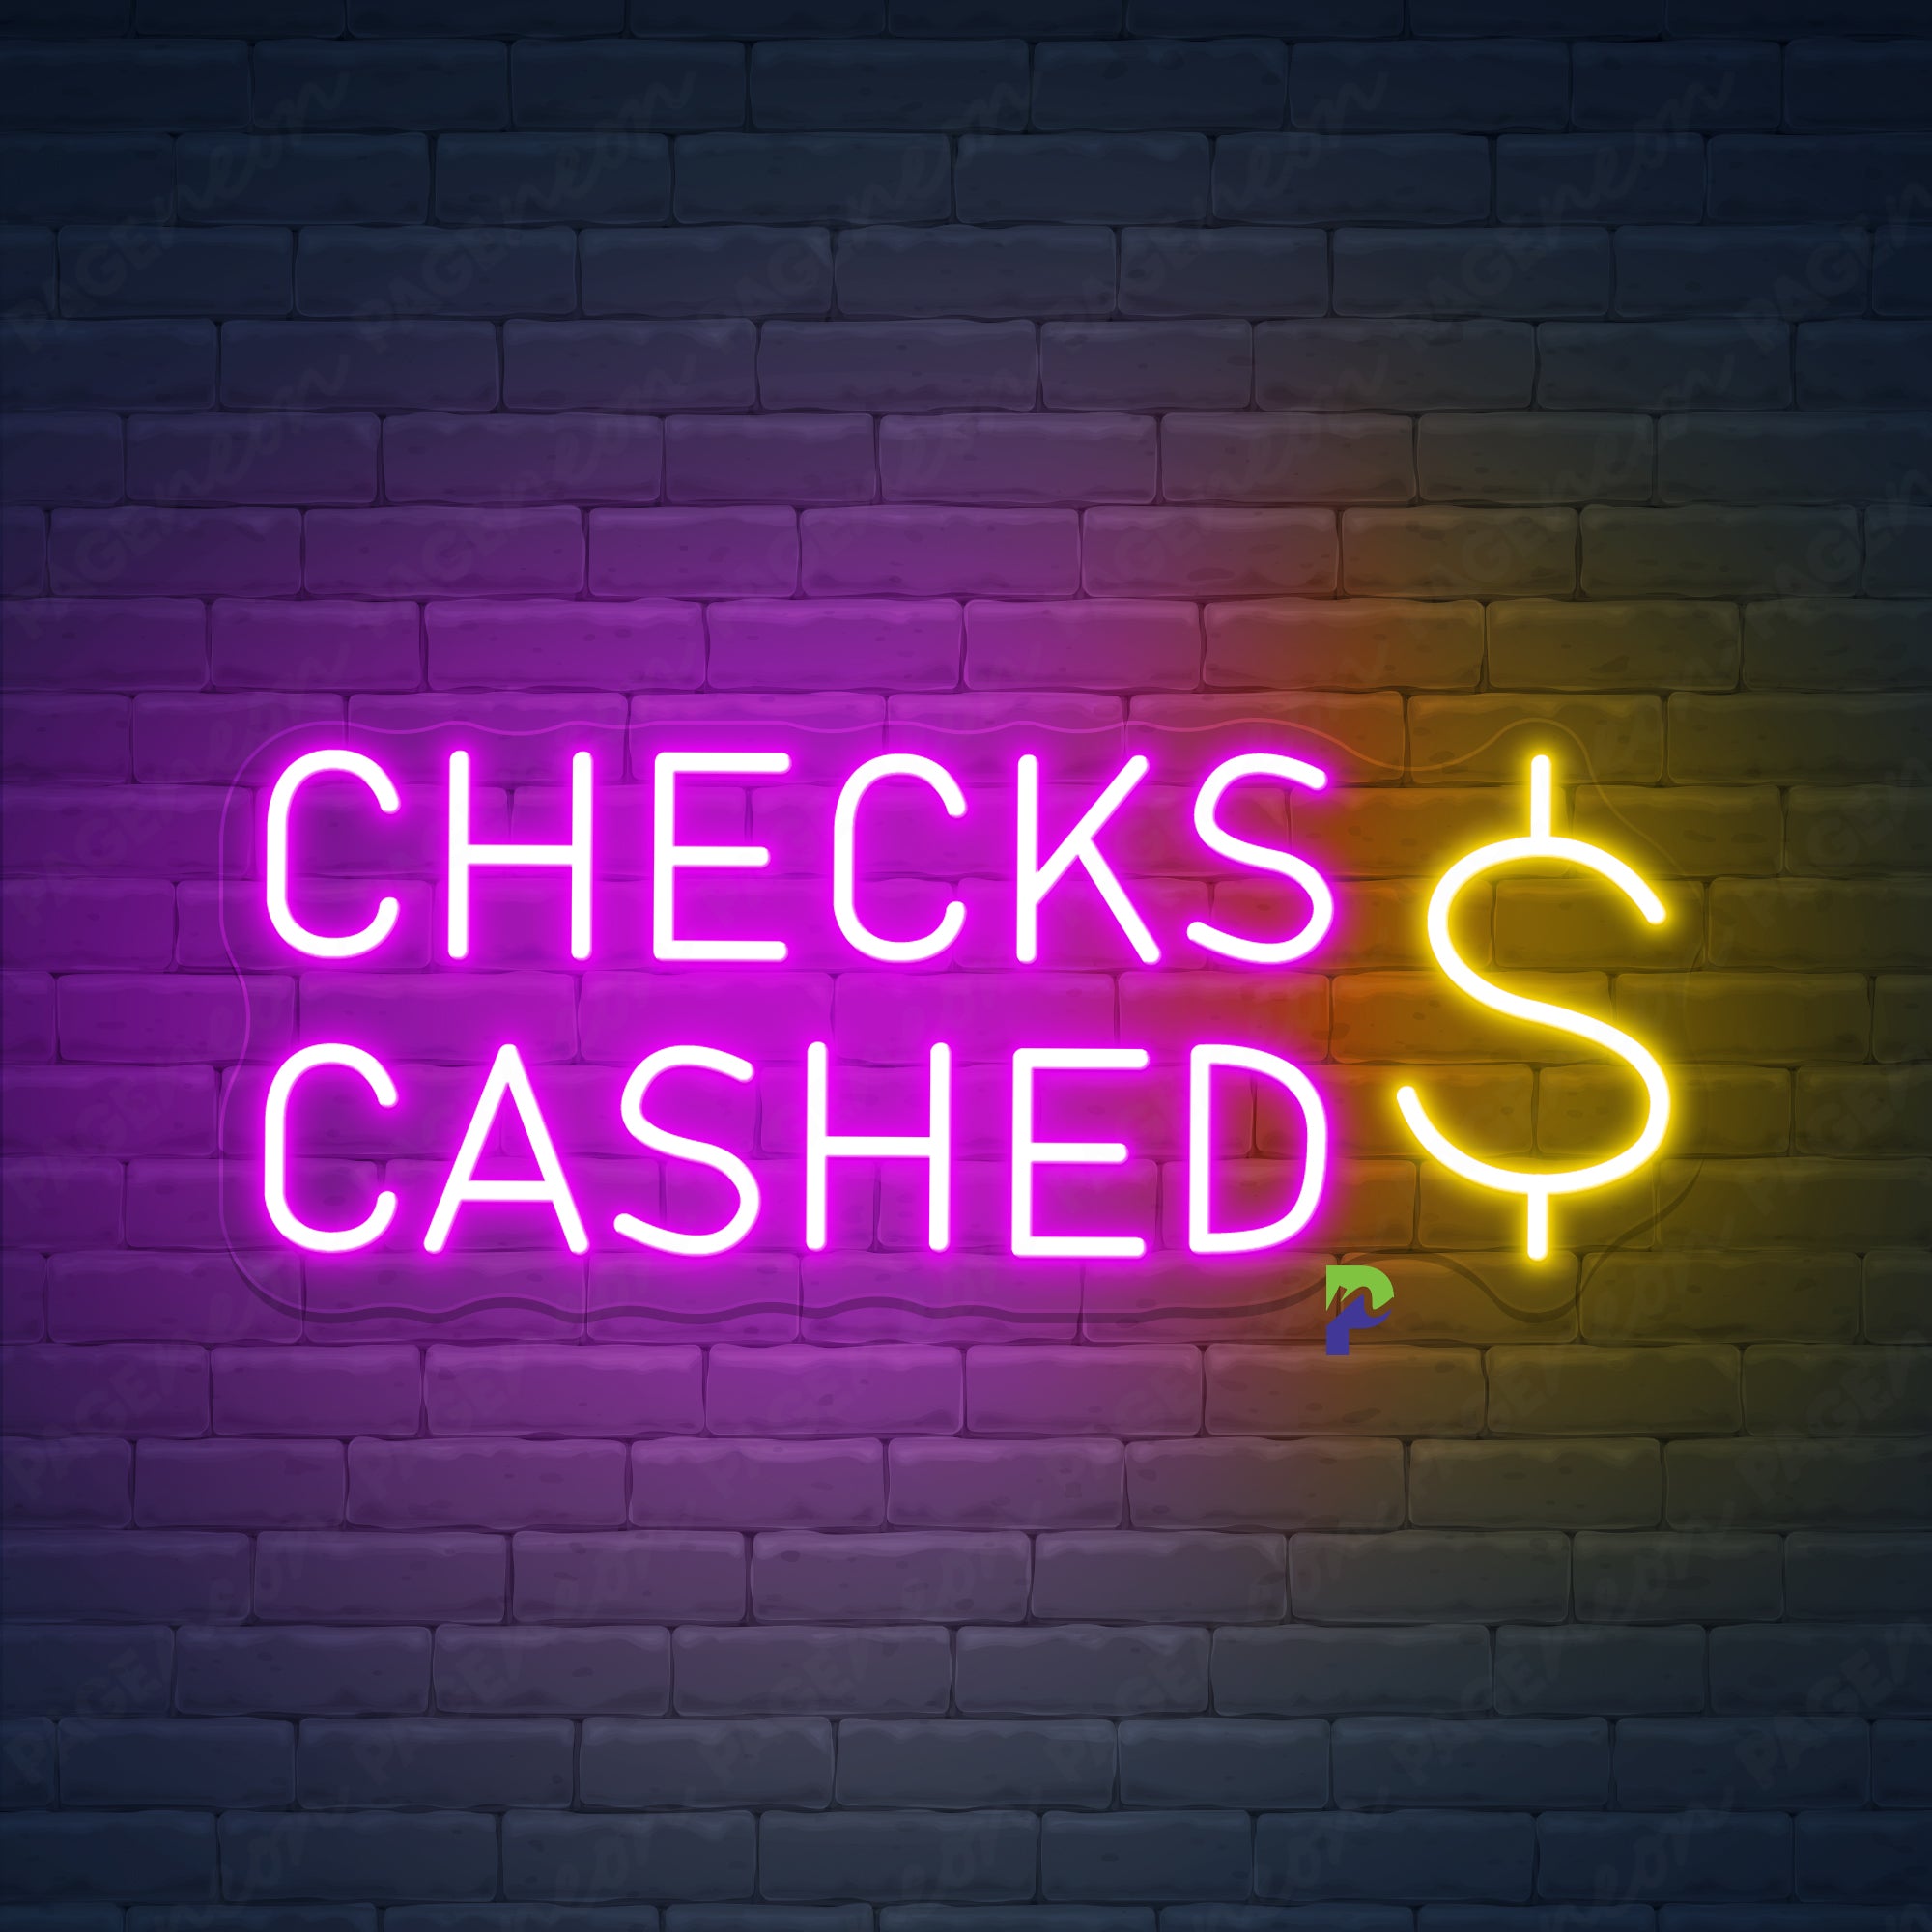 Cashed Checks Neon Sign Business Led Light